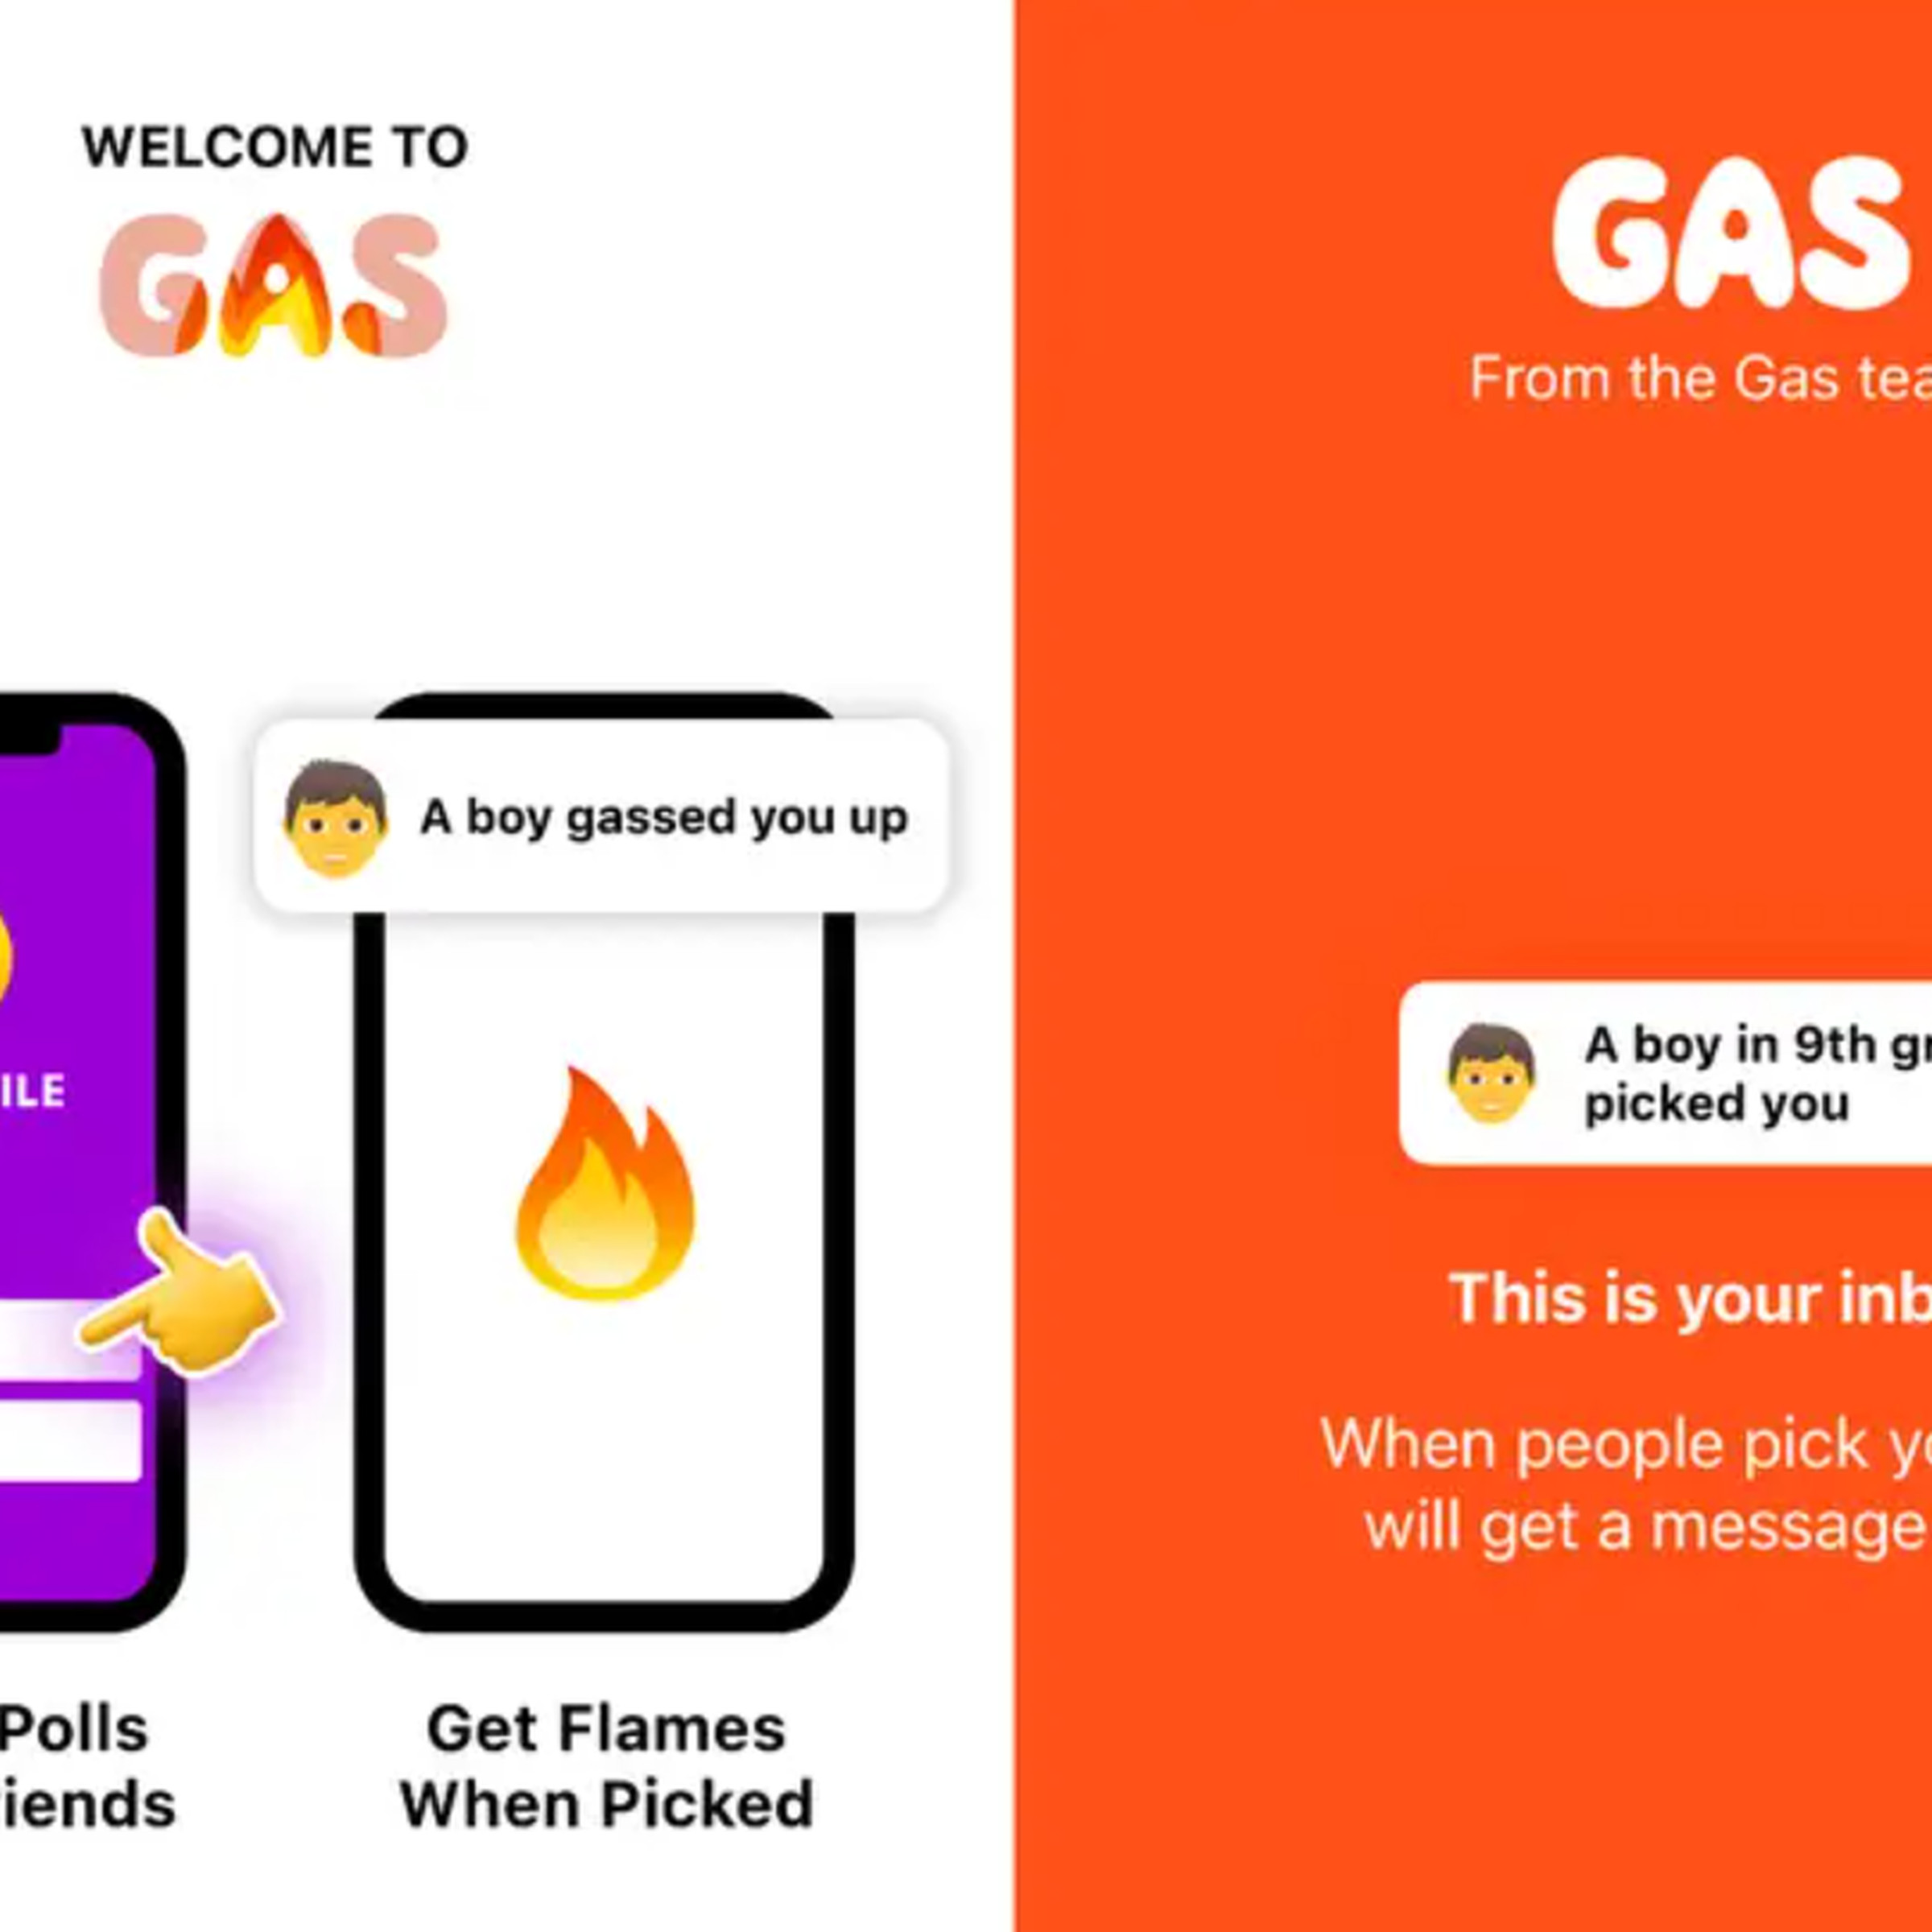 Screenshots of the gas app showing polls and compliments between friends